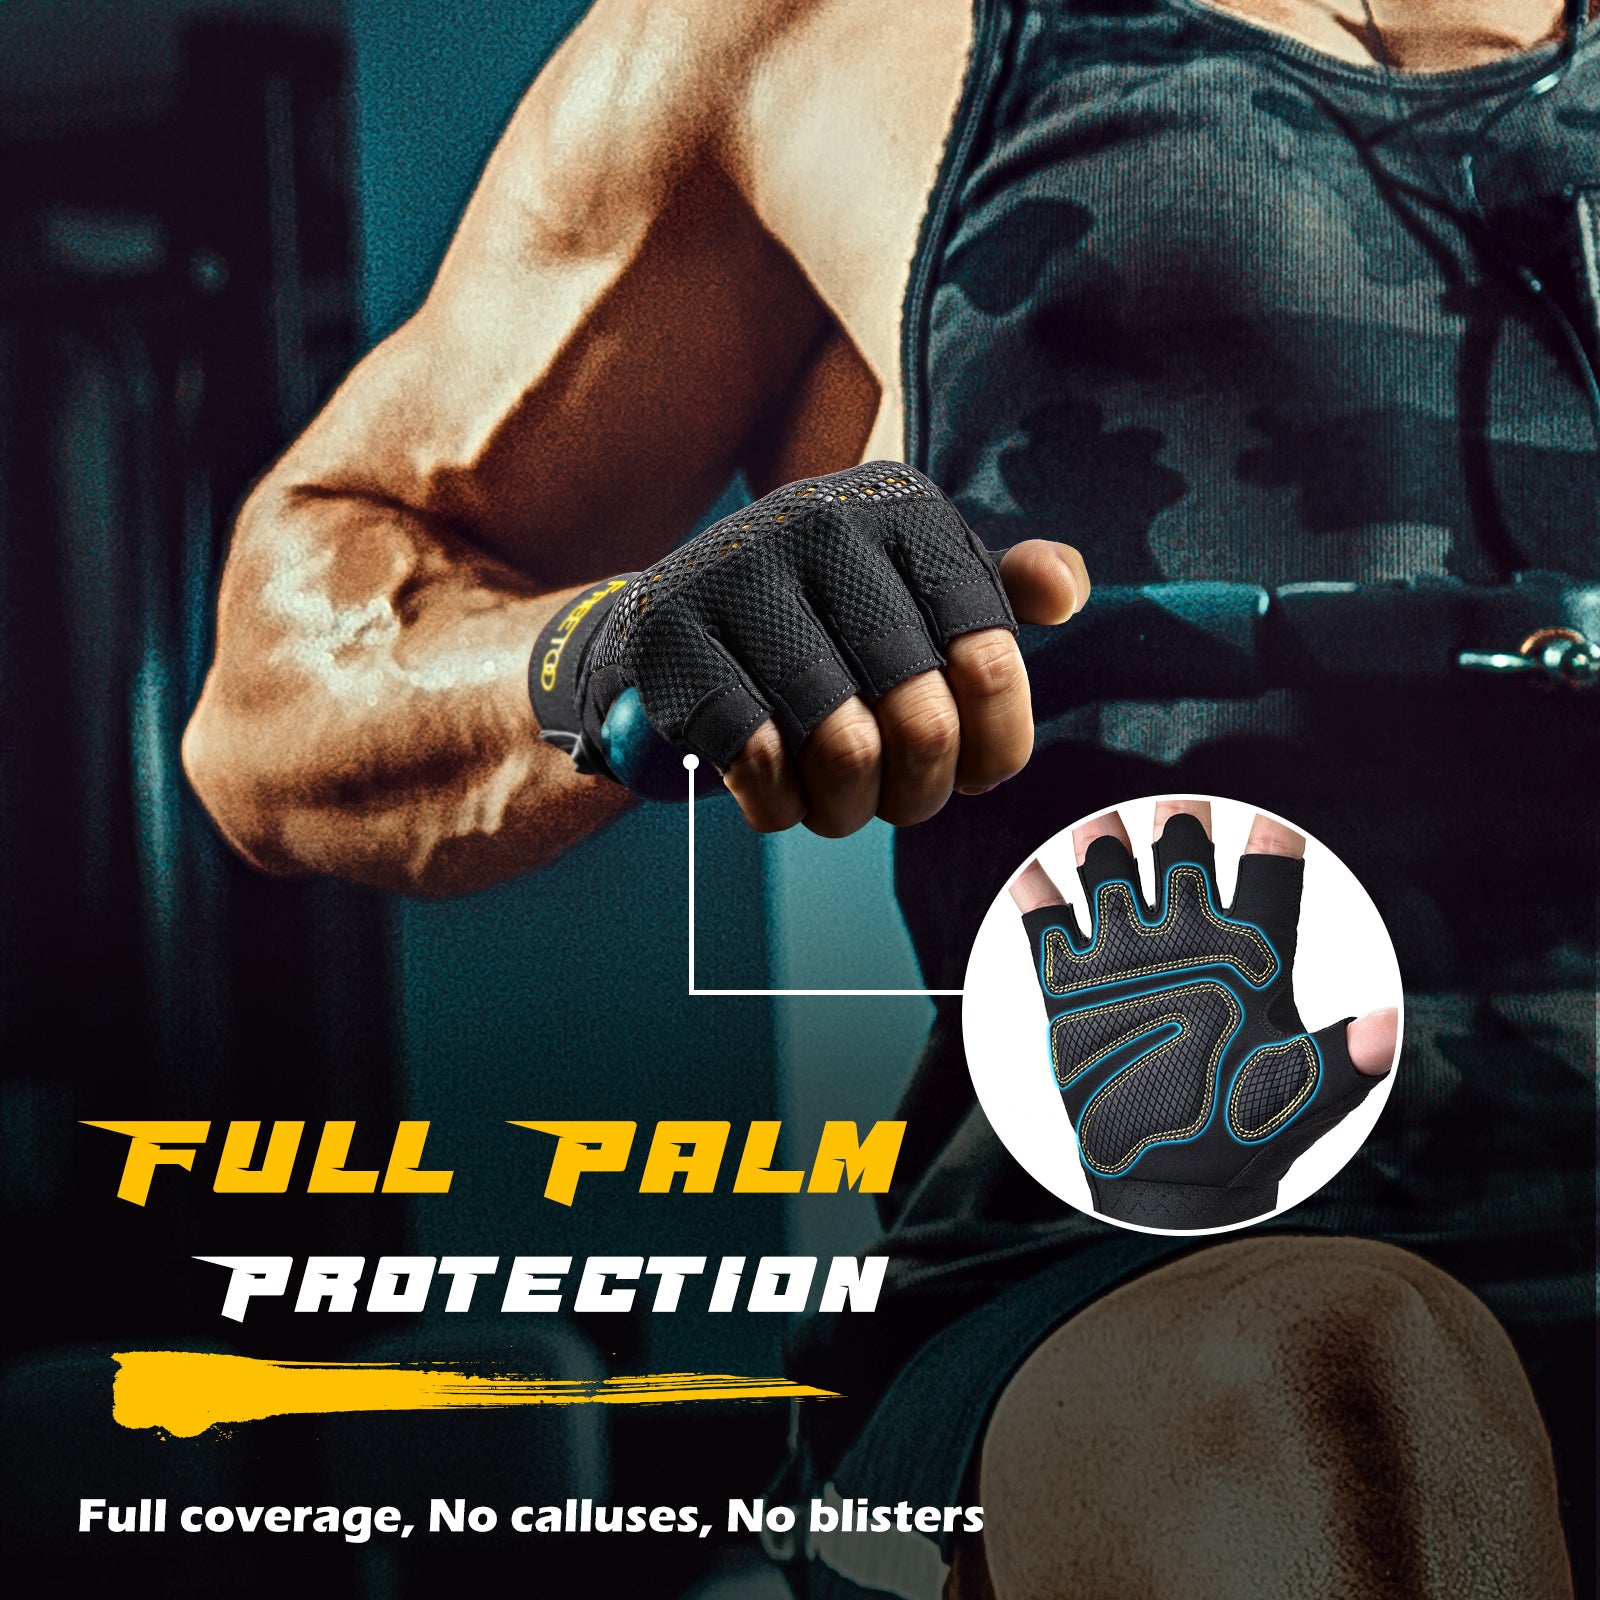 FREETOO® Gym Gloves [Full Palm Protection] with Cushion Pads and Silicone Grip for Men